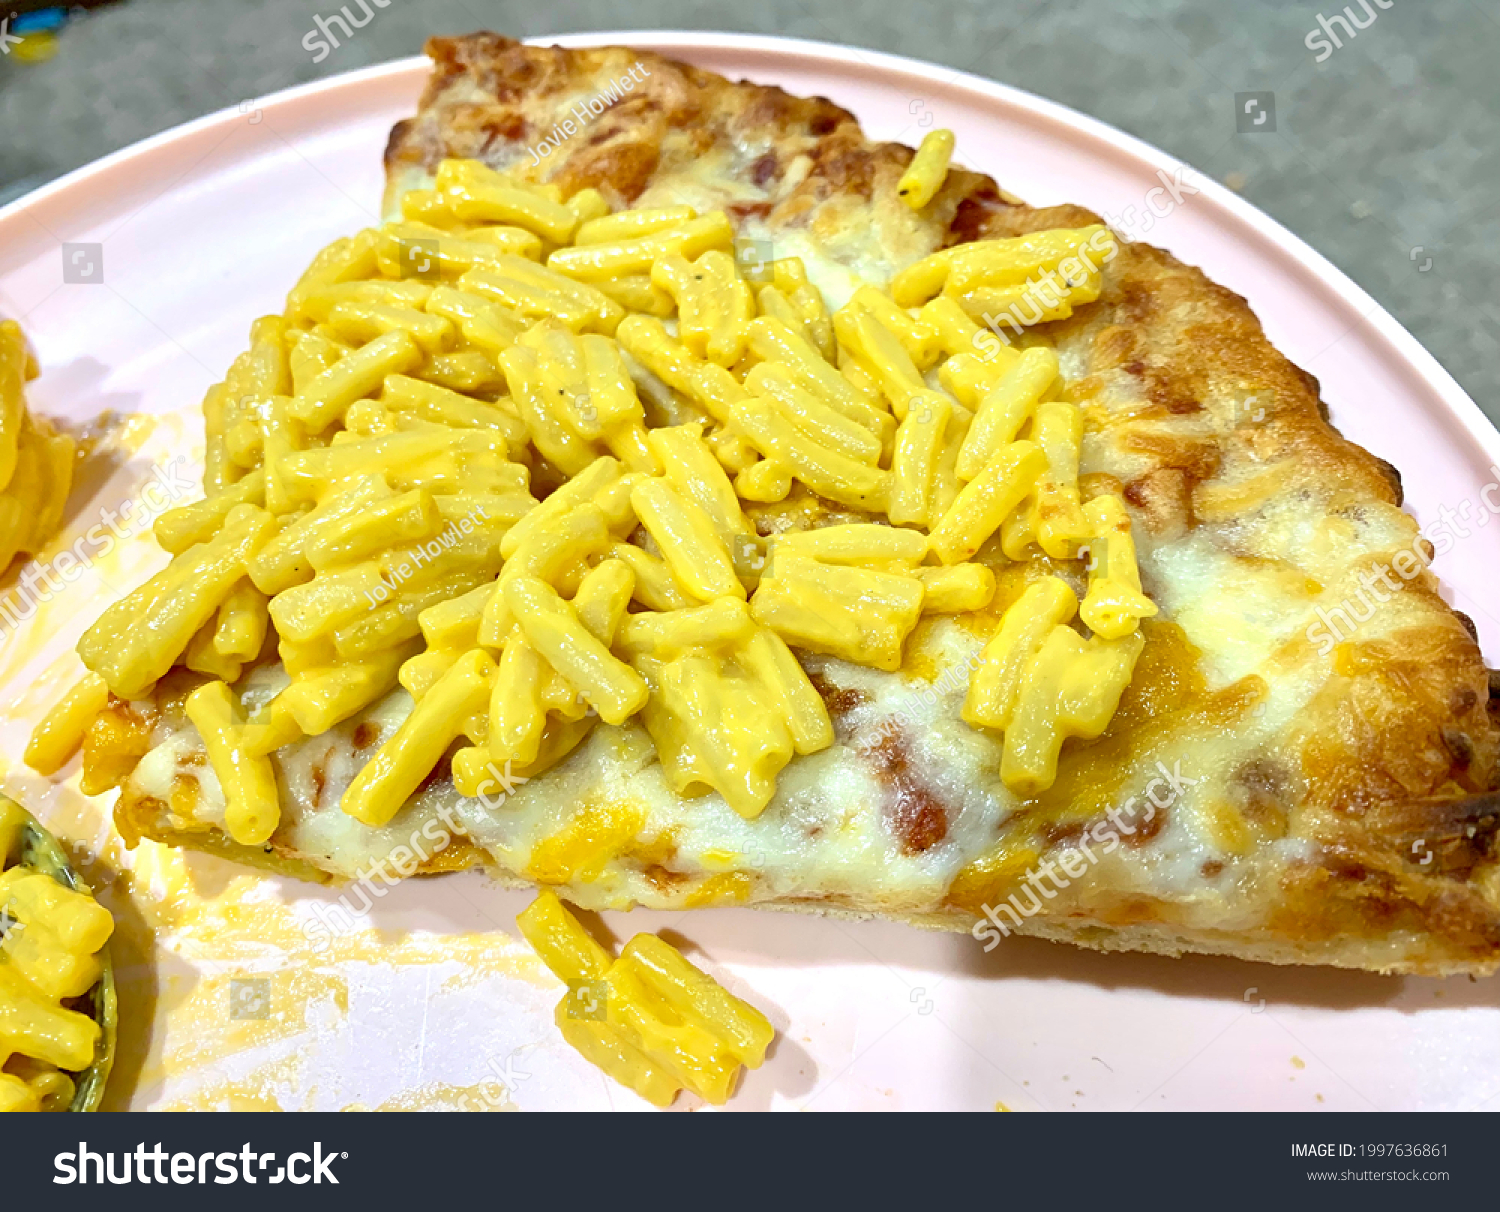 Macaroni and cheese on top of cheese pizza #1997636861